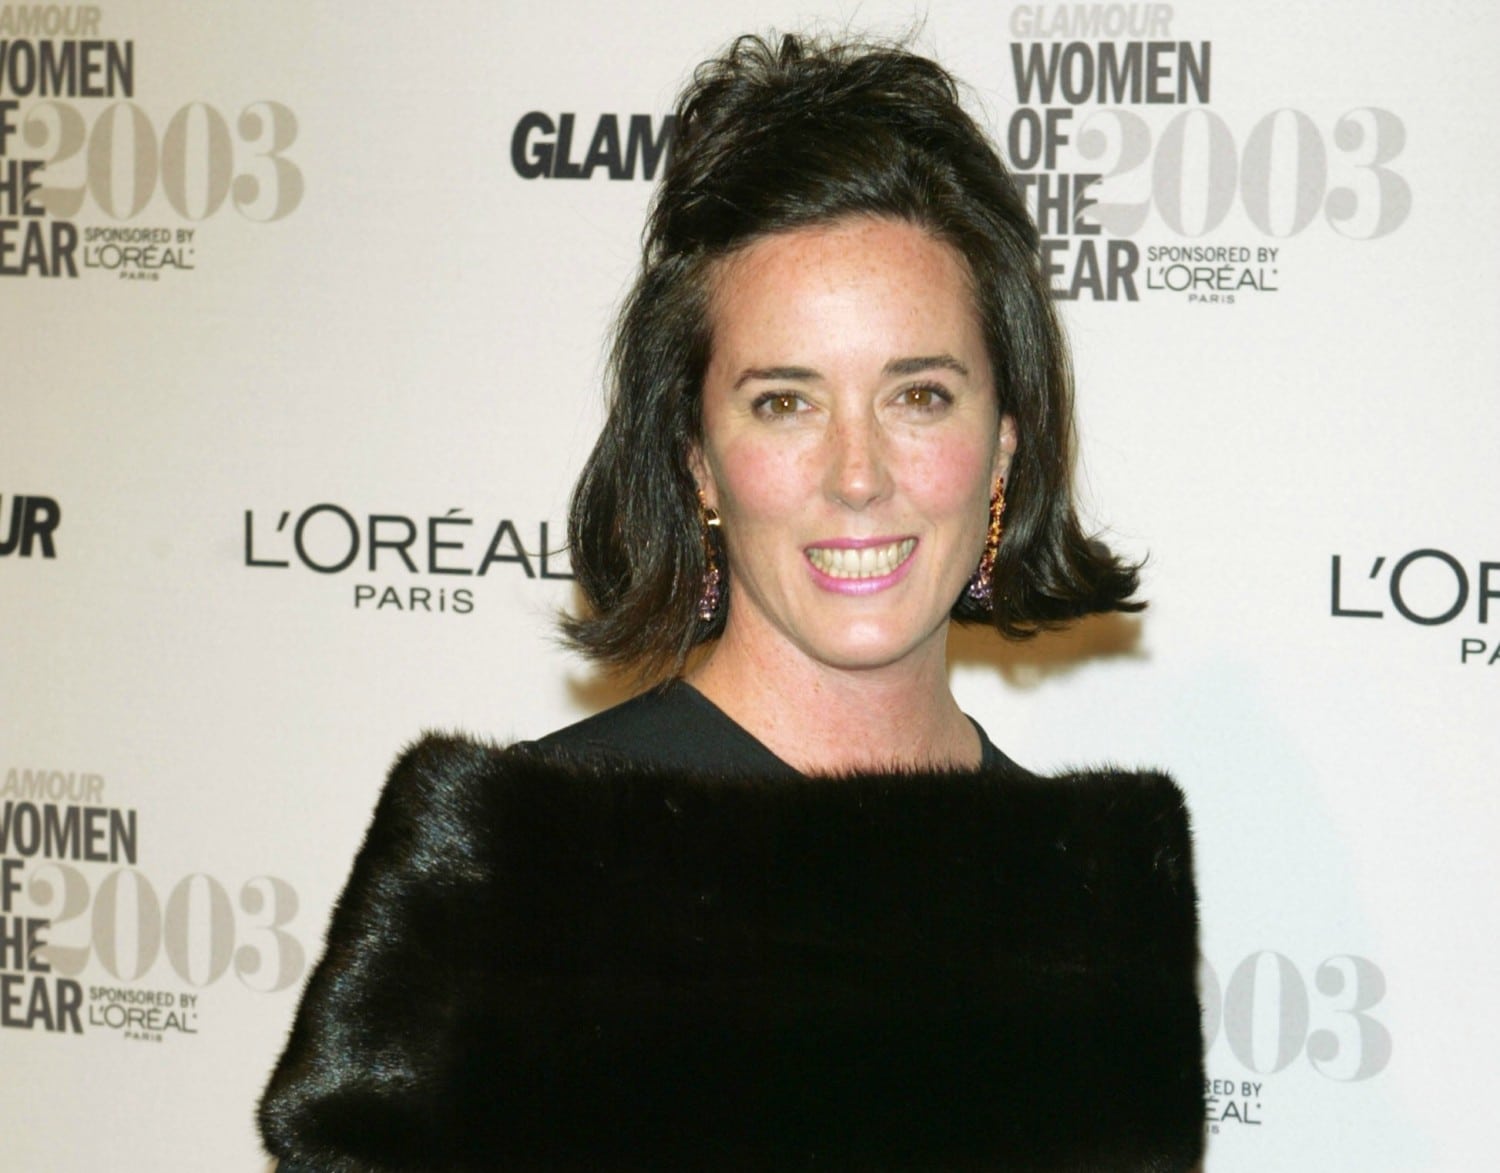 I'm a middle-aged woman who 'Has it all' and Kate Spade's death didn't  shock me